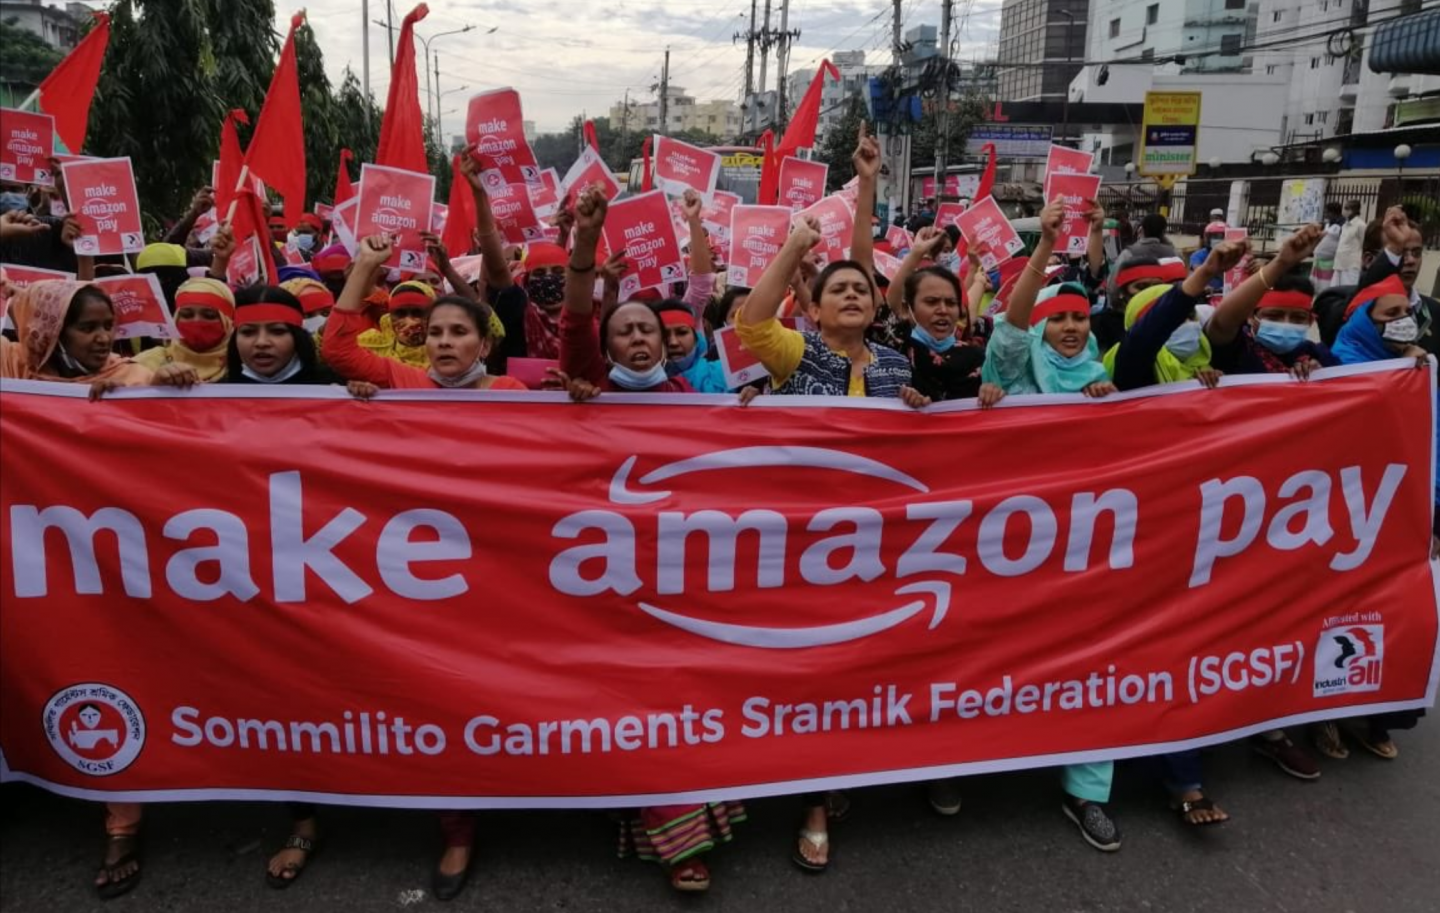 Protesters with raised fists hold a red banner that reads "make amazon pay."